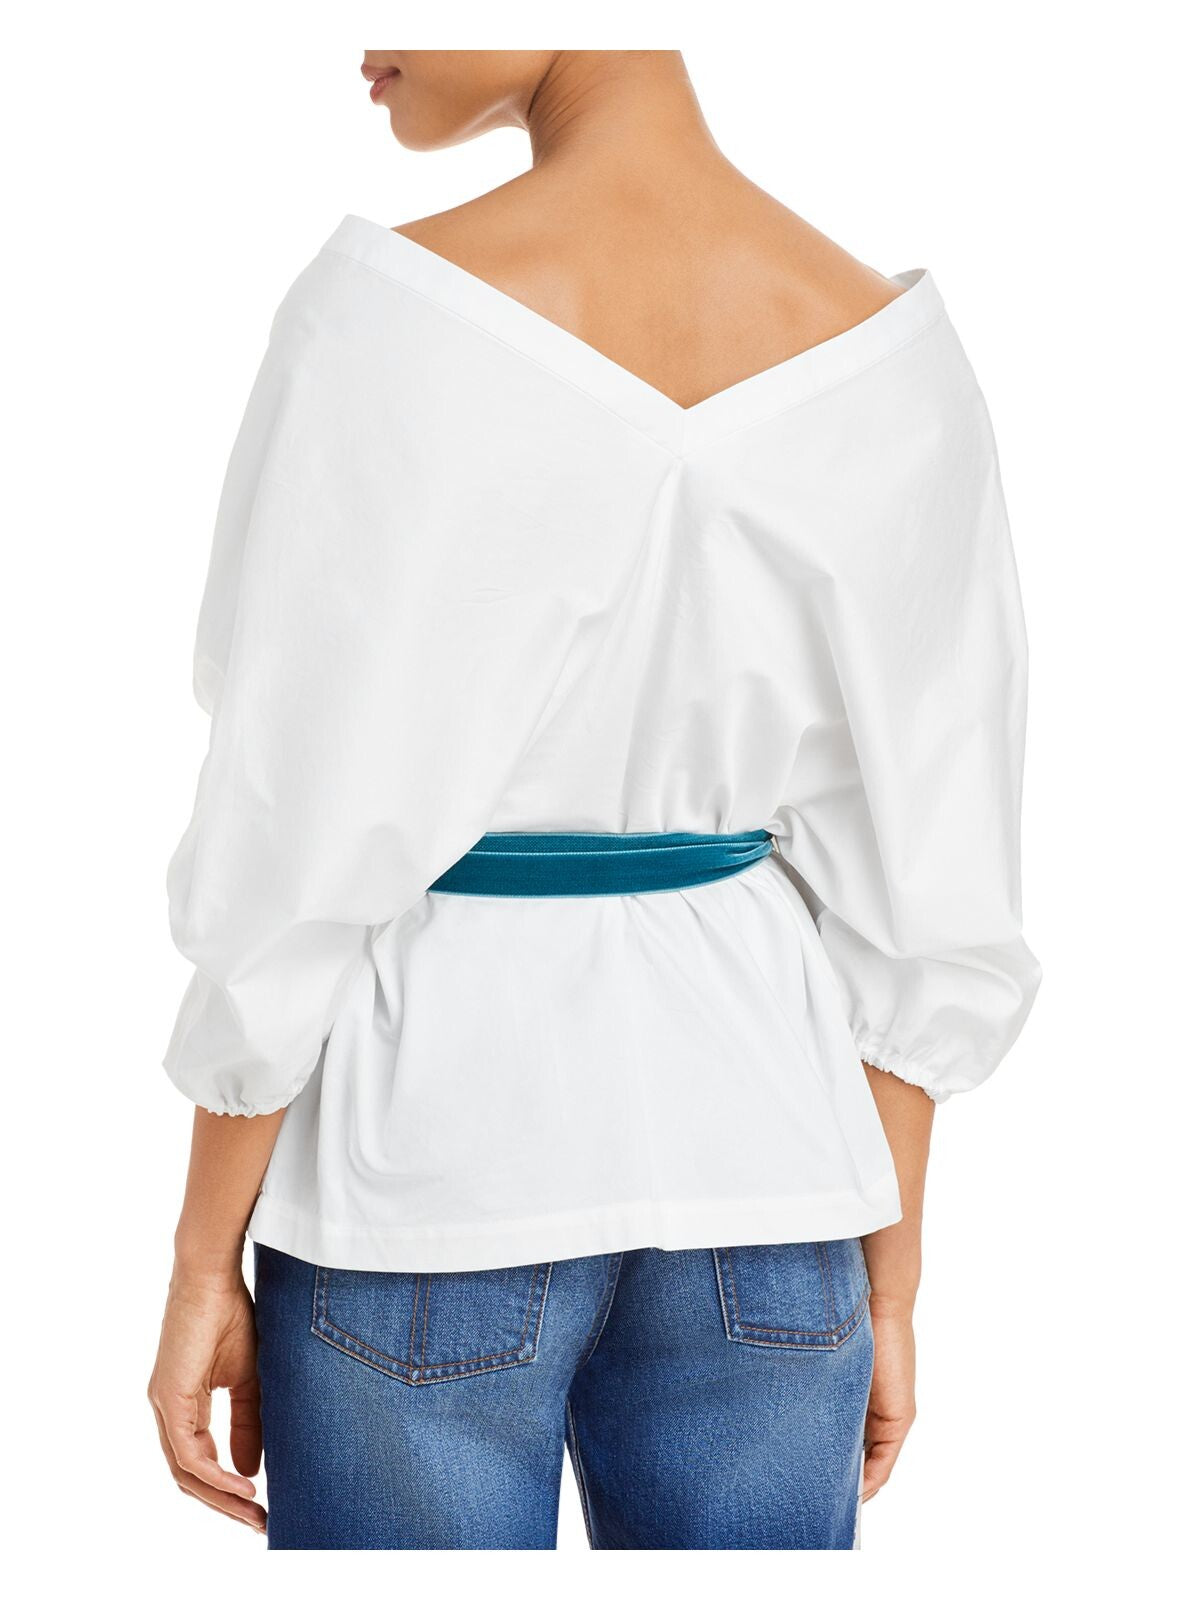 HELLESSY Womens White Pleated Tie Belt Decorative Placket Dolman Sleeve Off Shoulder Cocktail Button Up Top XS